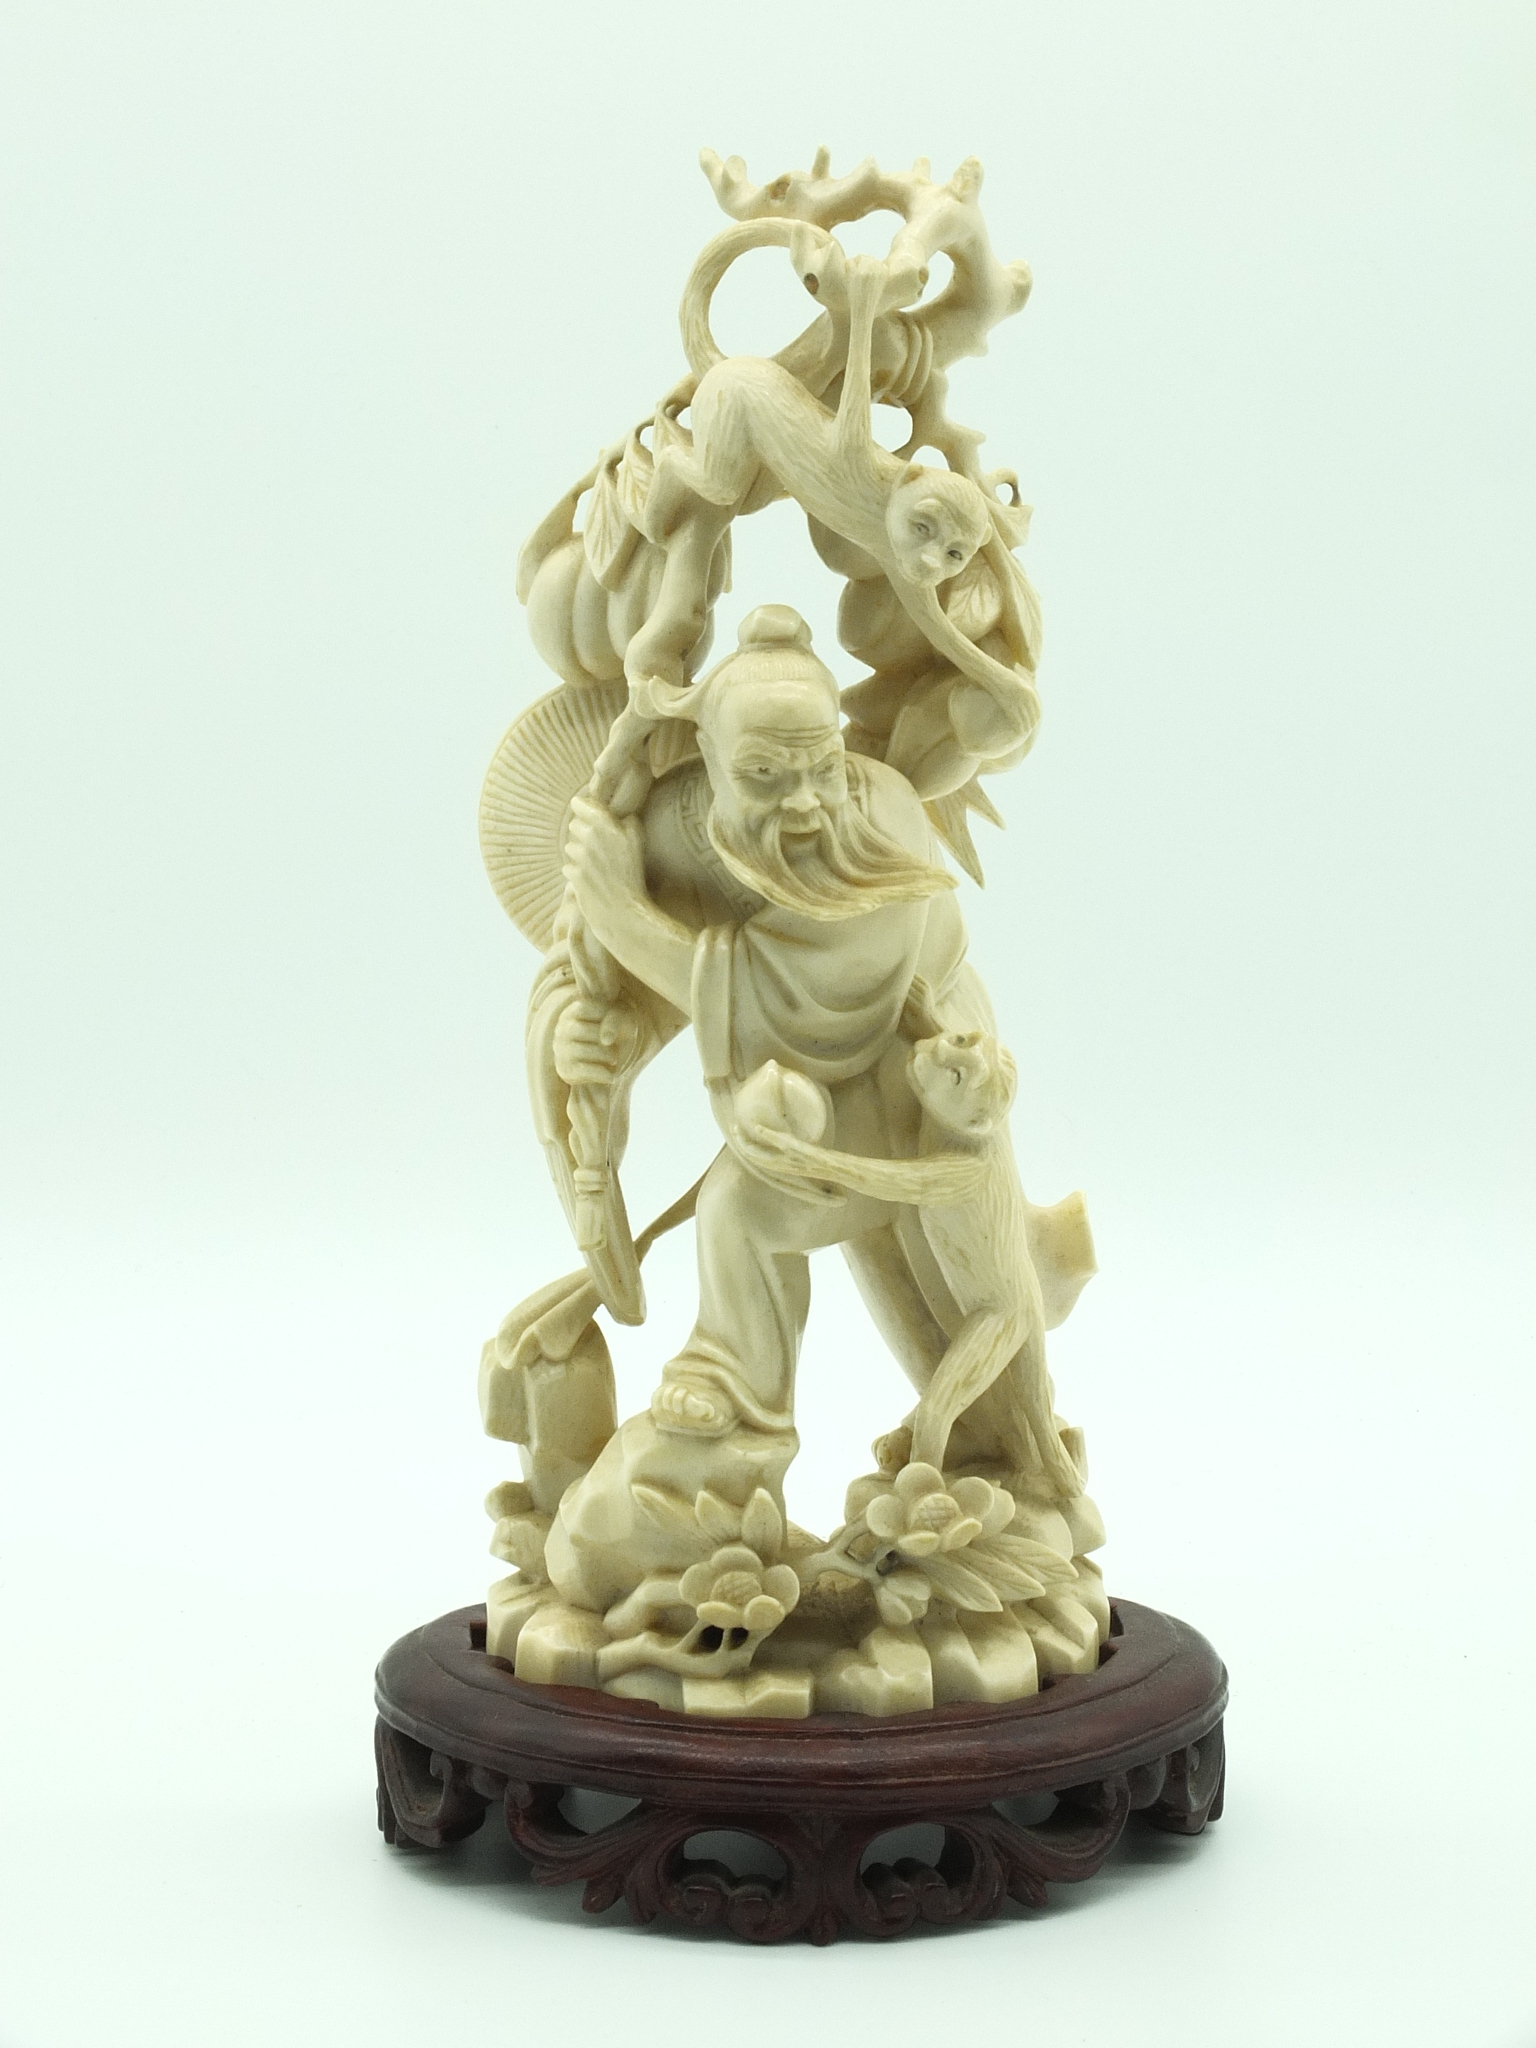 'Chinese Elephant Ivory Figure of a Scholar and Monkeys Early 20th Century'